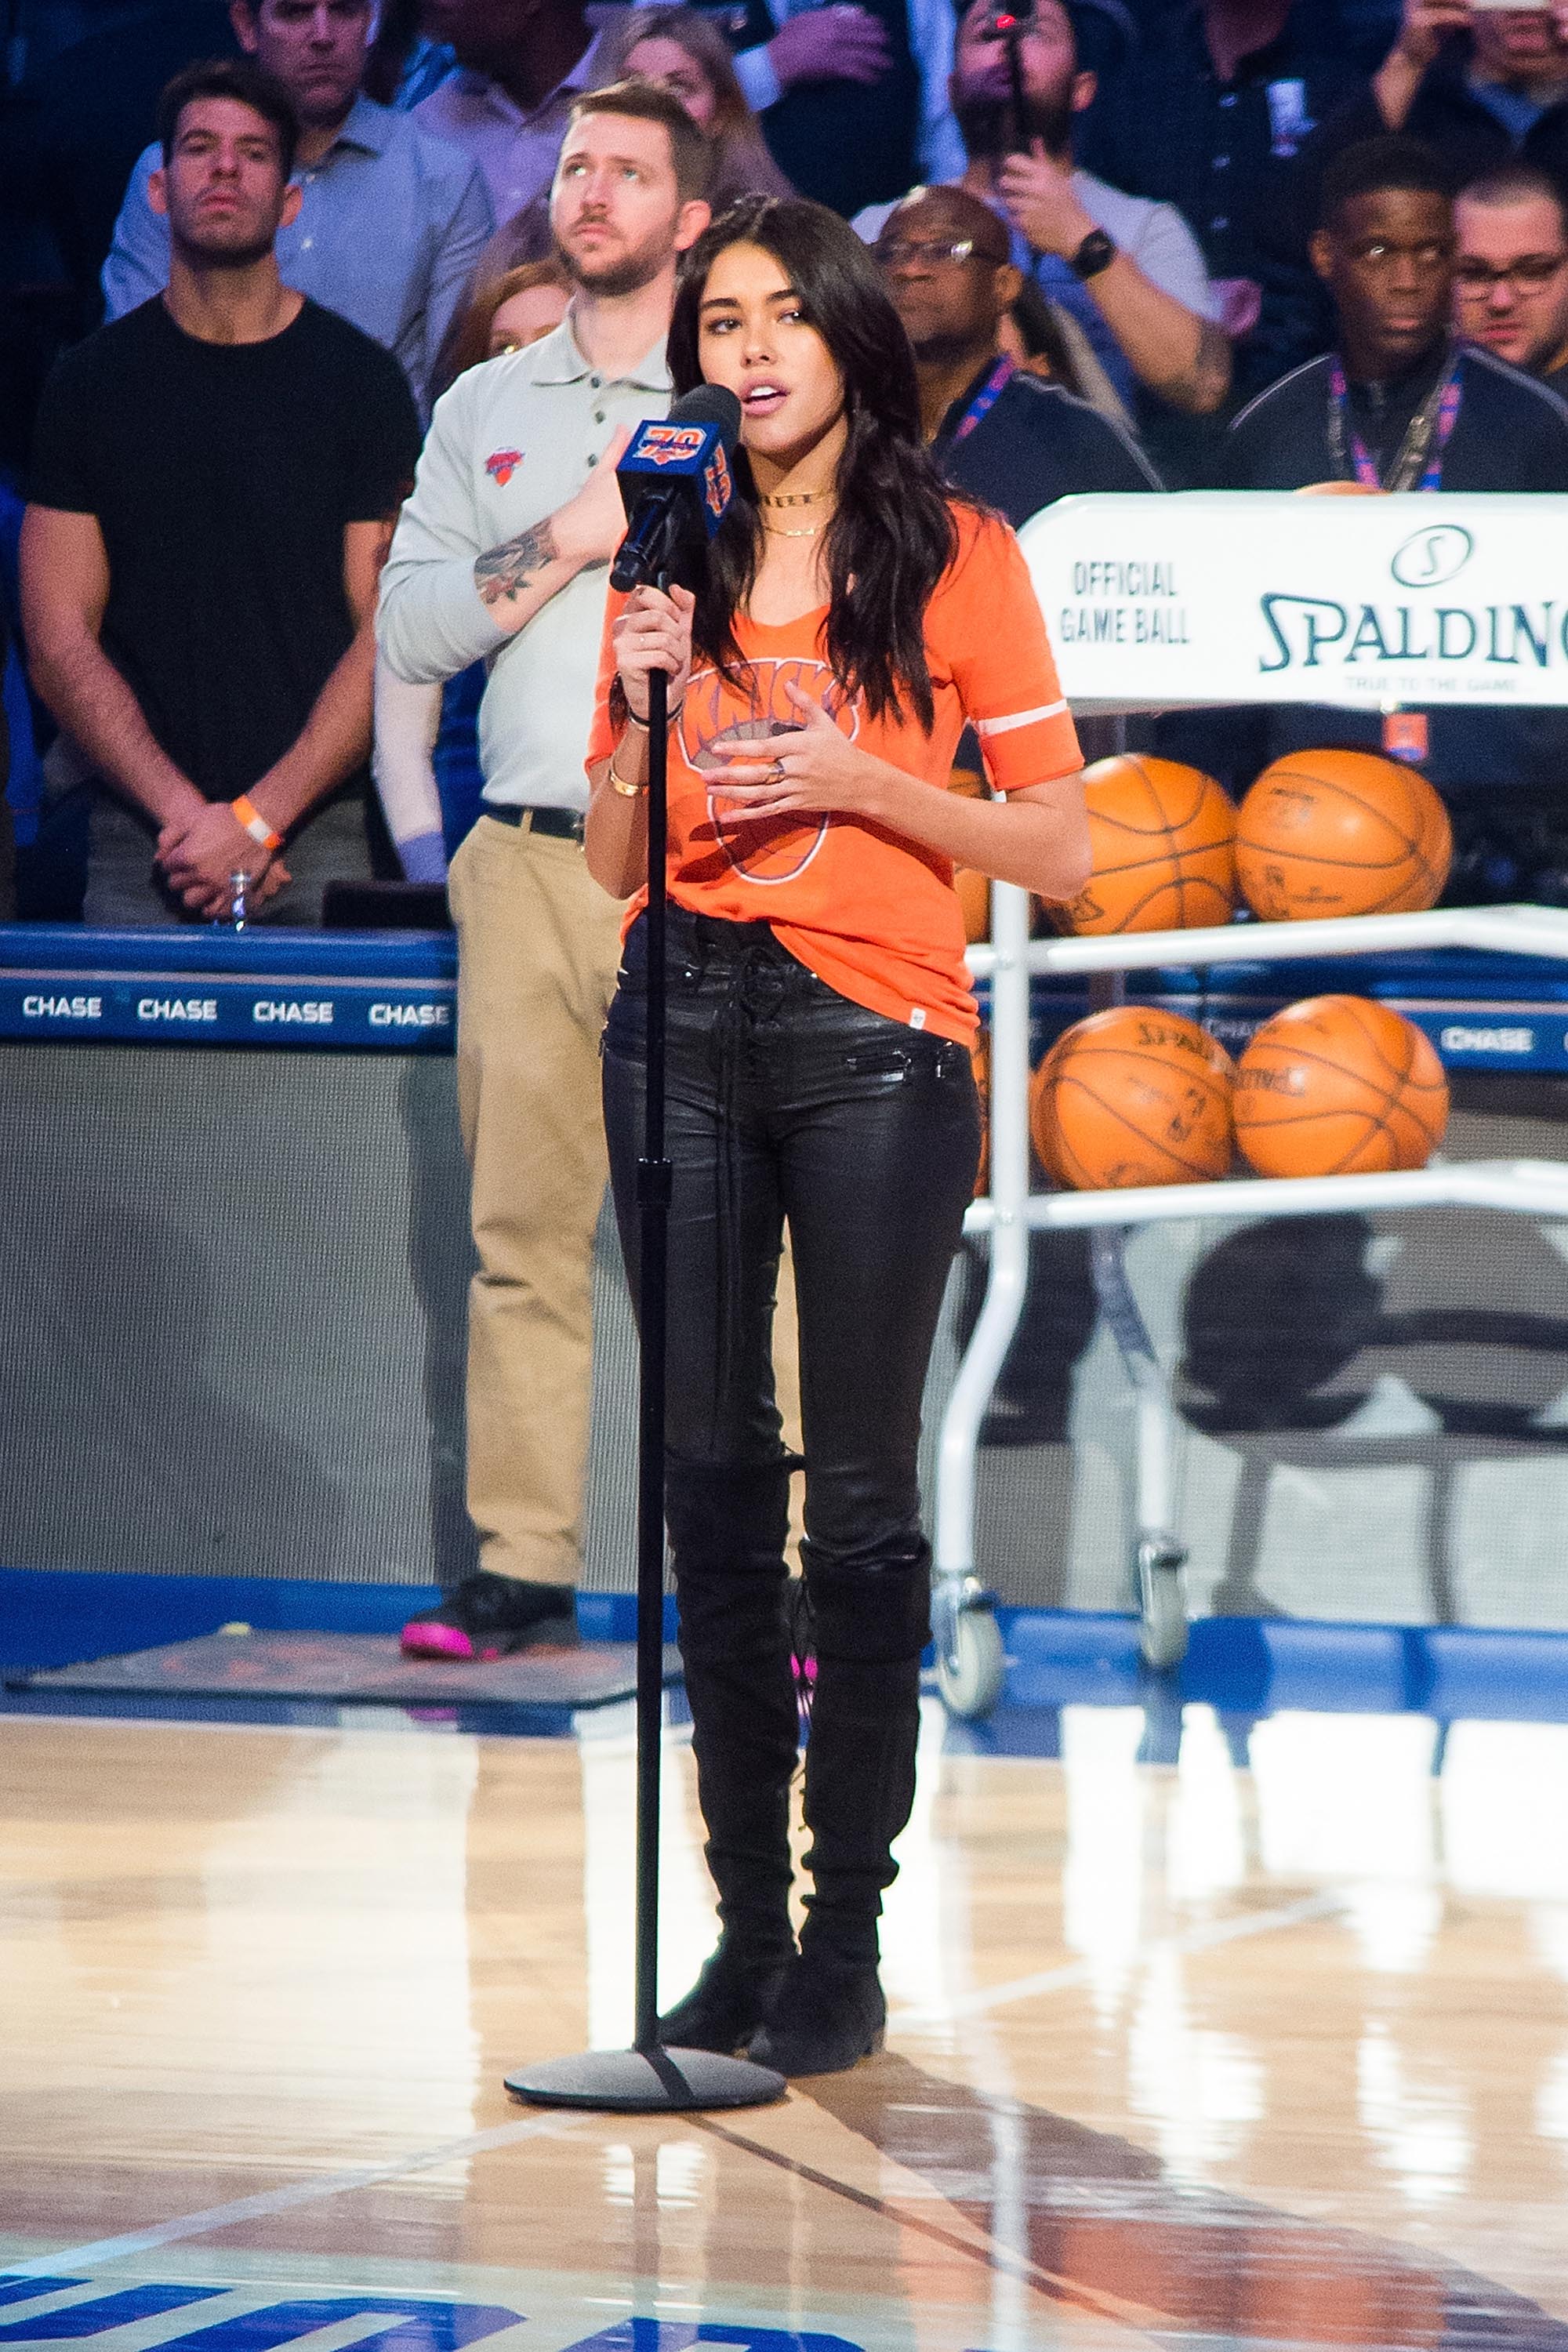 Madison Beer sings the United States National Anthem